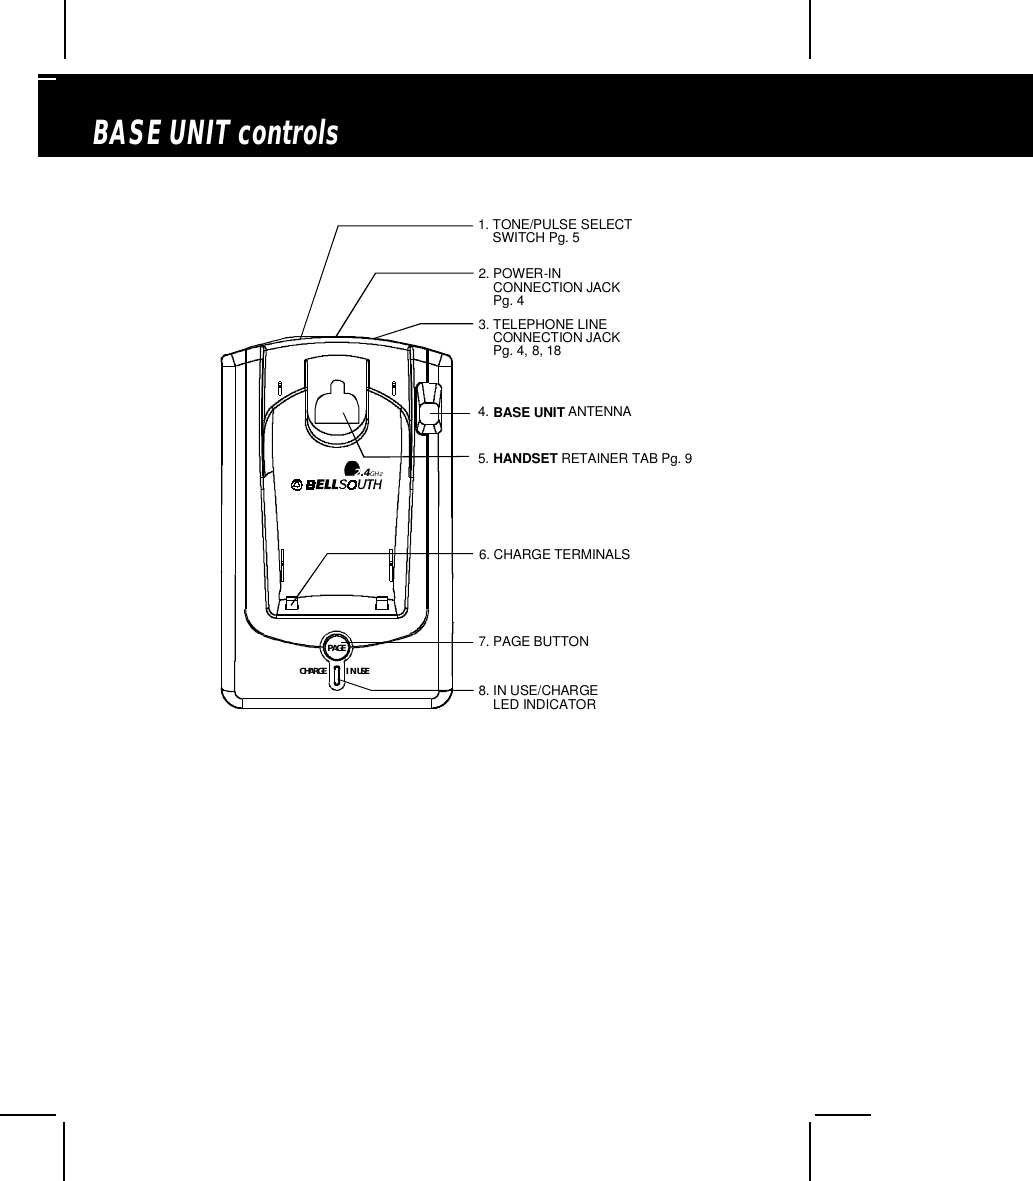 BASE UNIT controls1. TONE/PULSE SELECT    SWITCH Pg. 52. POWER-IN    CONNECTION JACK    Pg. 43. TELEPHONE LINE     CONNECTION JACK    Pg. 4, 8, 184. BASE UNIT ANTENNA6. CHARGE TERMINALS7. PAGE BUTTON8. IN USE/CHARGE    LED INDICATOR2.4GHzCHARGEPAGEIN USE5. HANDSET RETAINER TAB Pg. 9